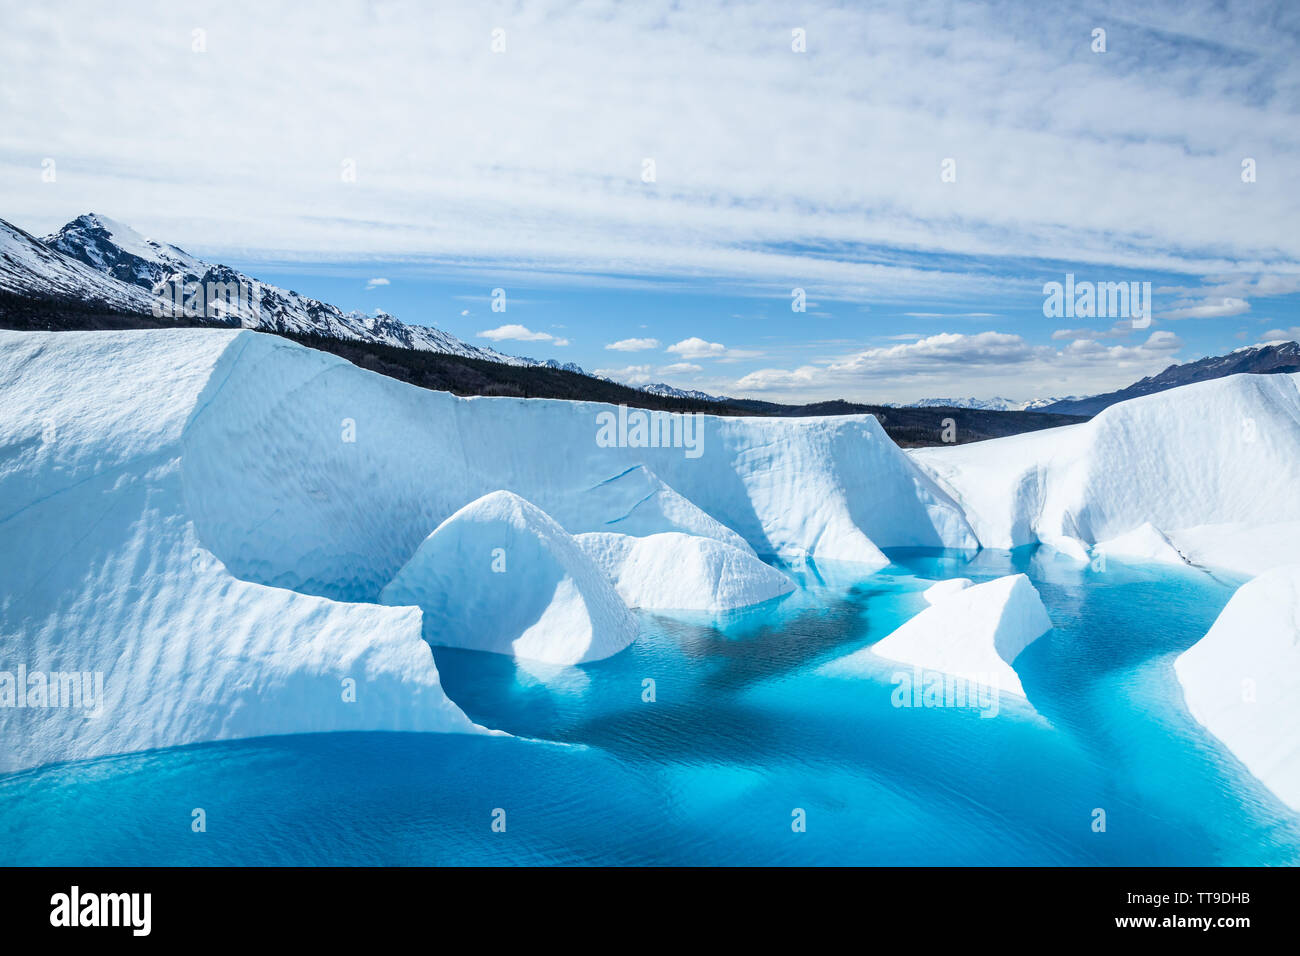 A lake sits on top of the Matanuska Glacier in south central Alaska. The ater is a deep crystal blue from minerals of the melting ice. Stock Photo